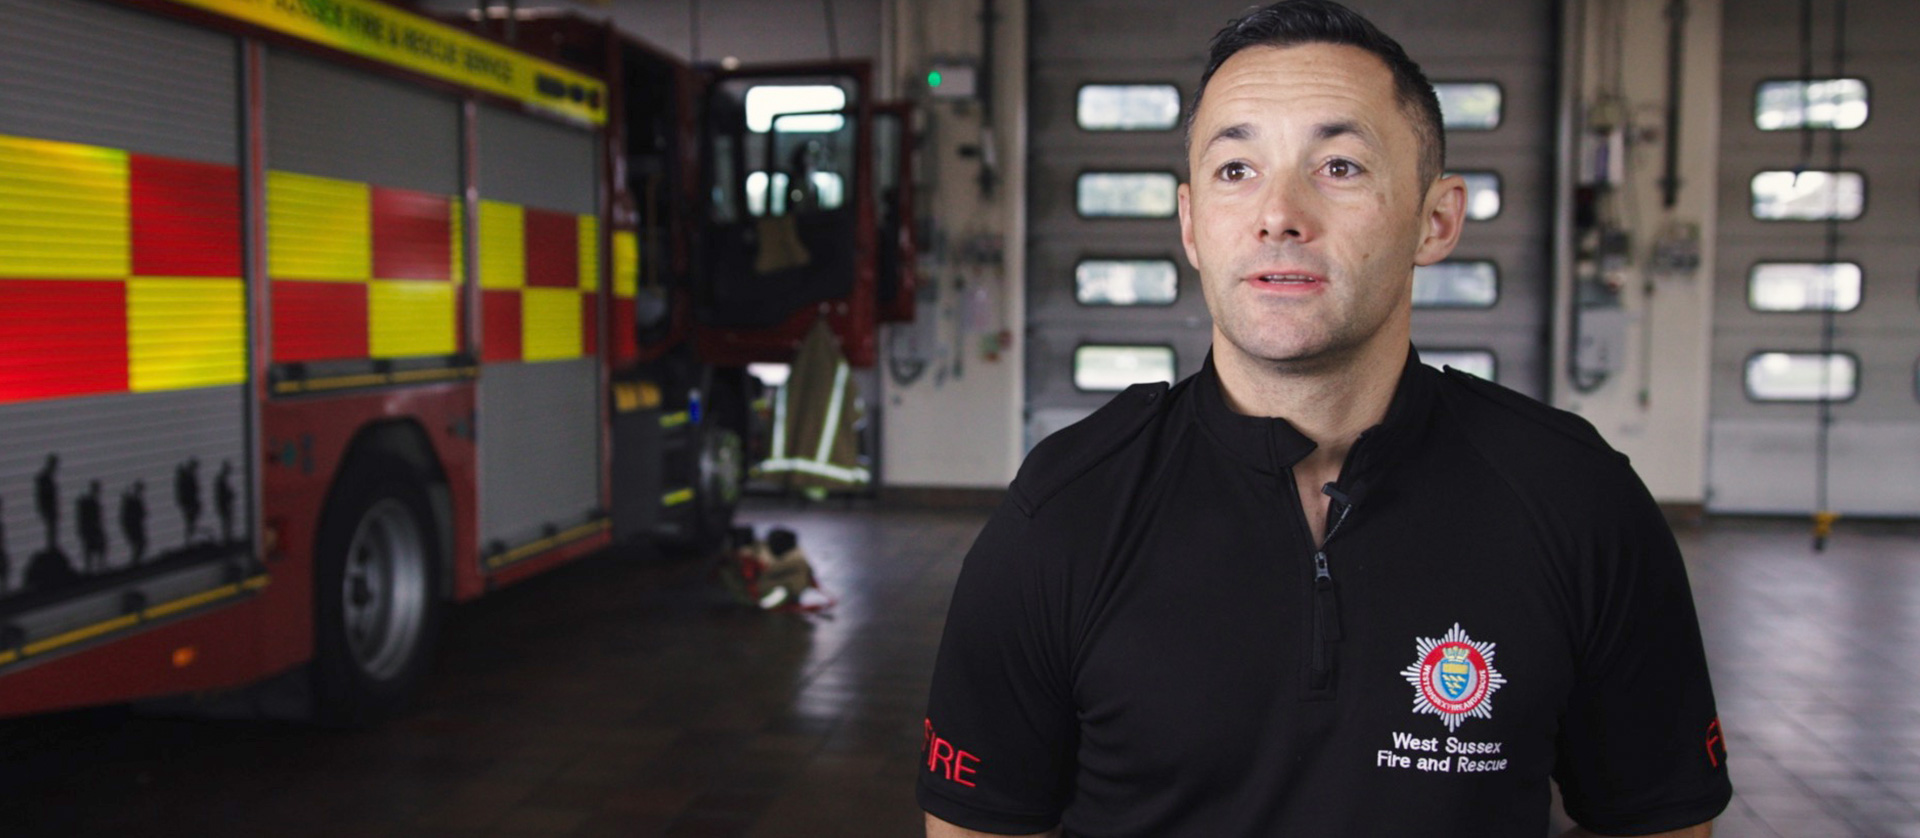 A firefighter at West Sussex Fire and Rescue discusses Champion Health